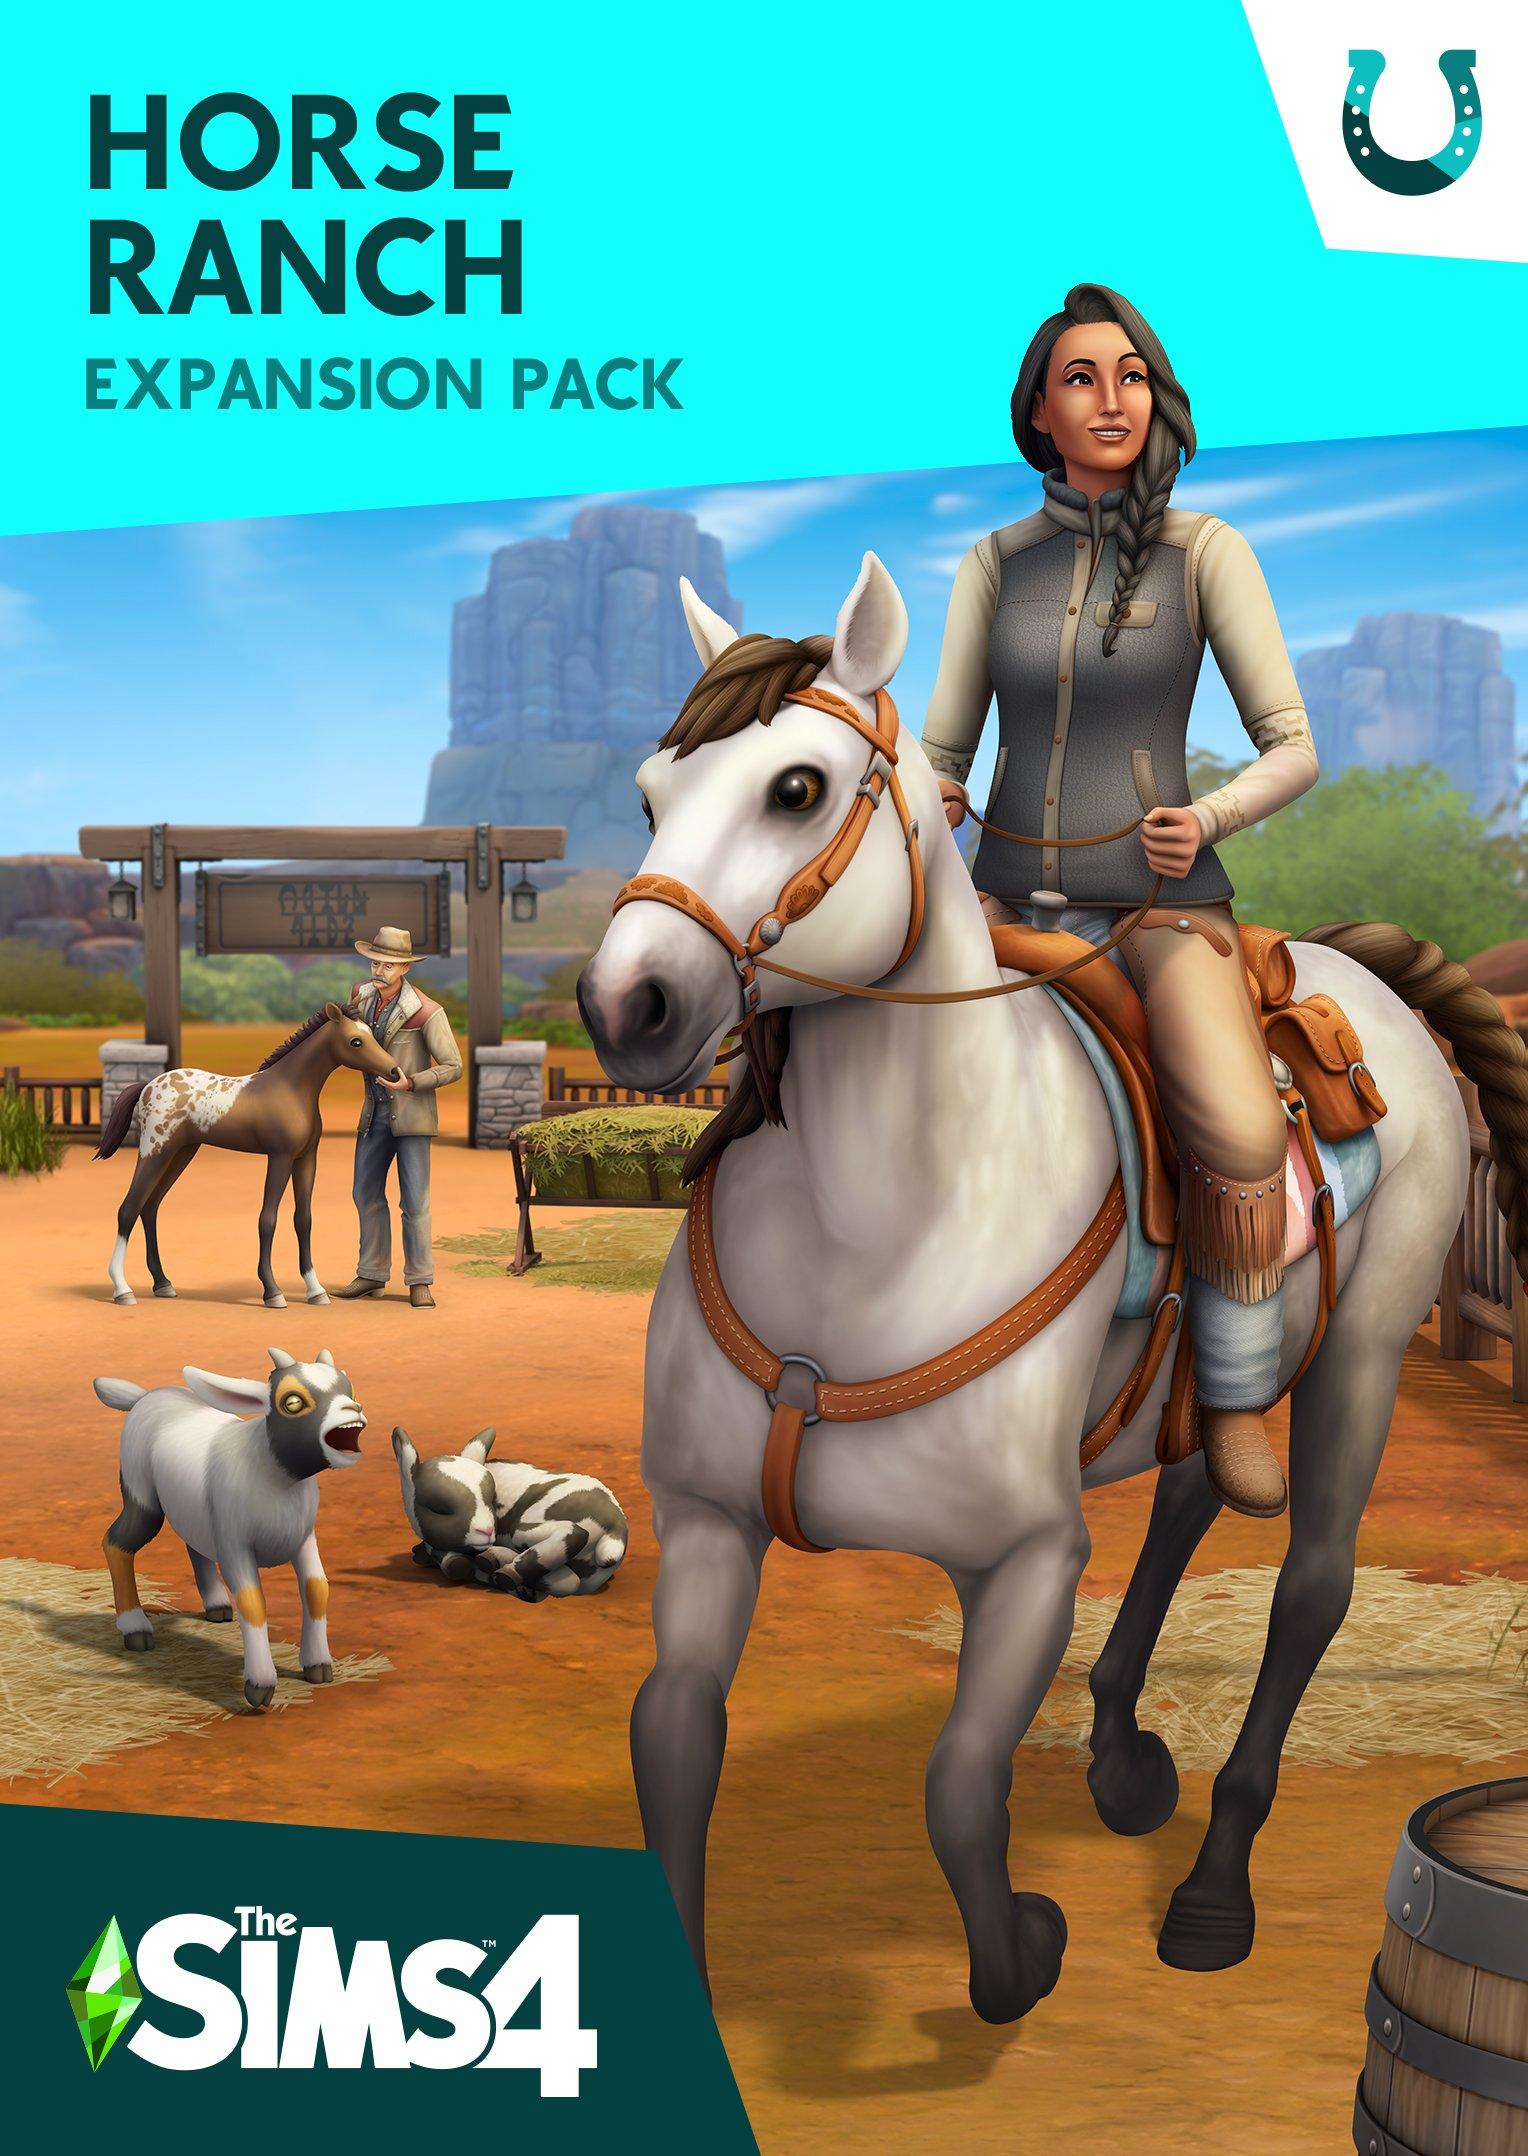 Sims 4 dlc cheap - here's how to save money on Sims 4 expansion packs